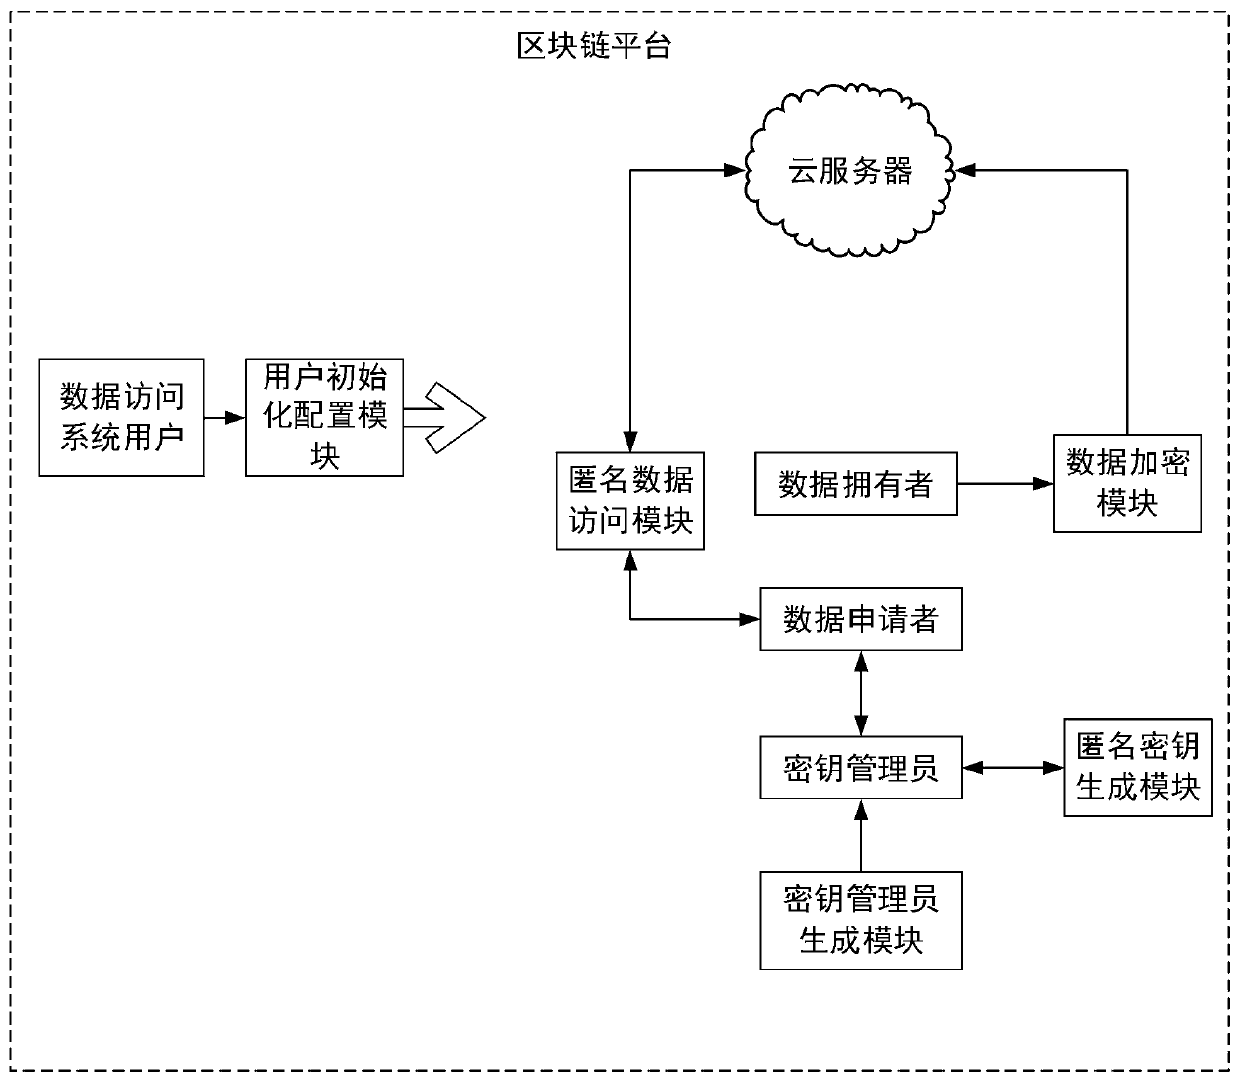 Data access control method and system in large-scale cloud storage based on block chain